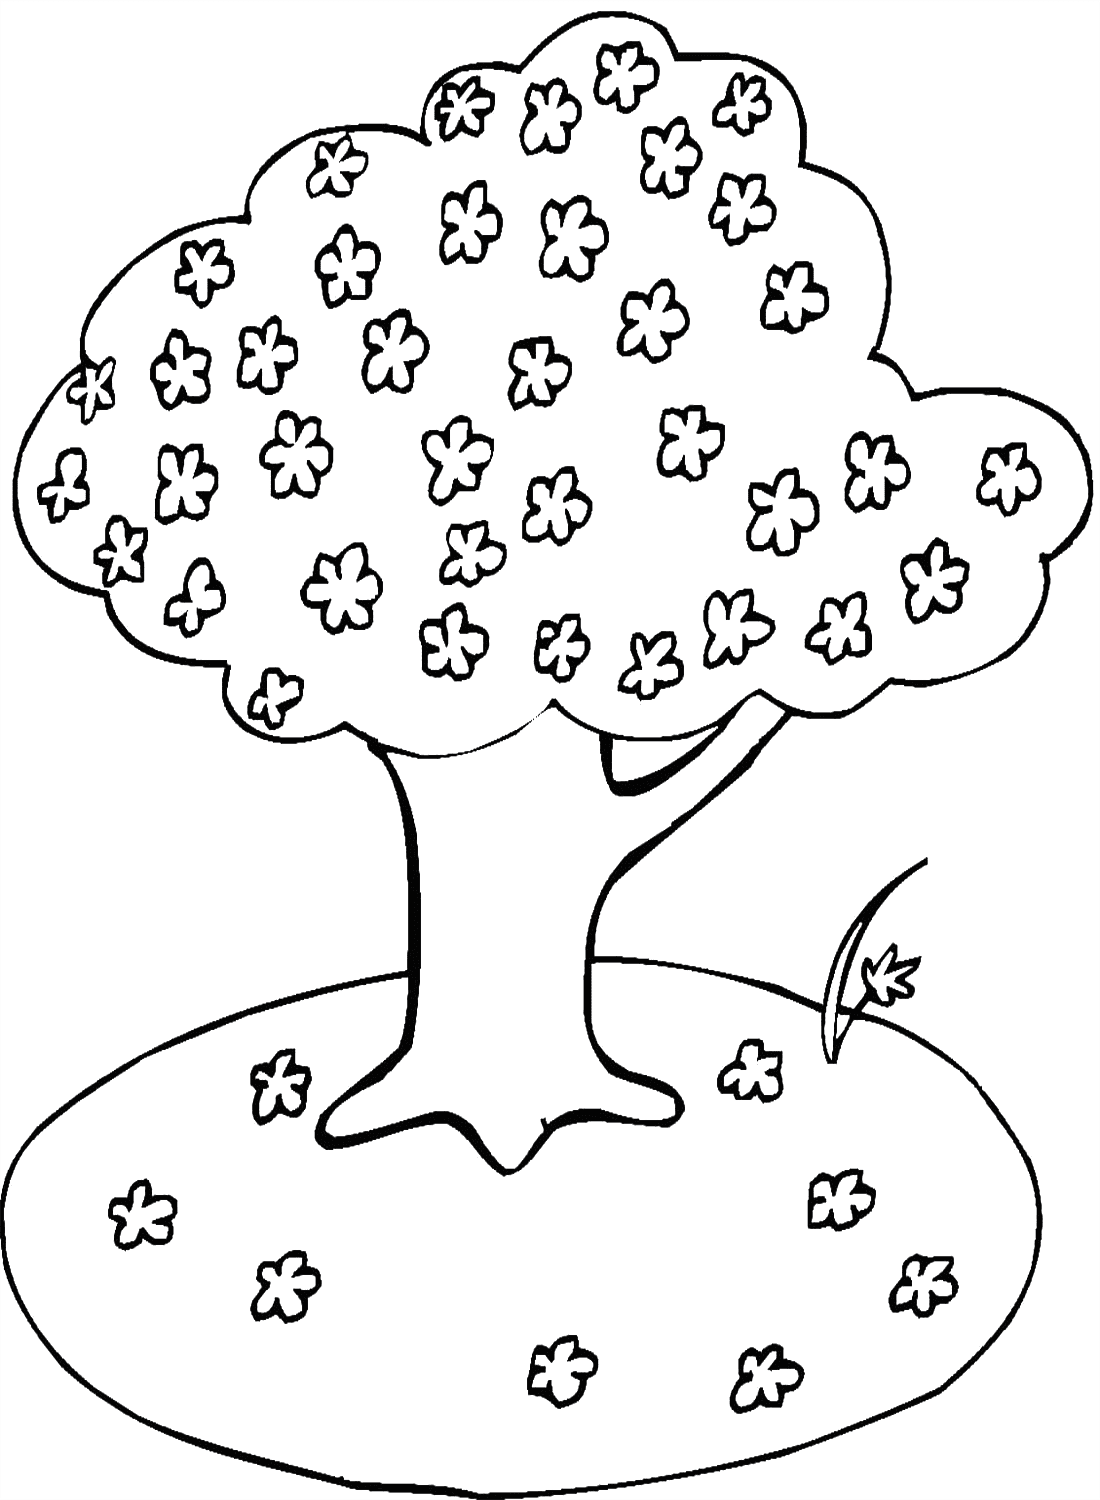 A Blooming Cherry Tree Coloring Page - Free Printable Coloring Pages